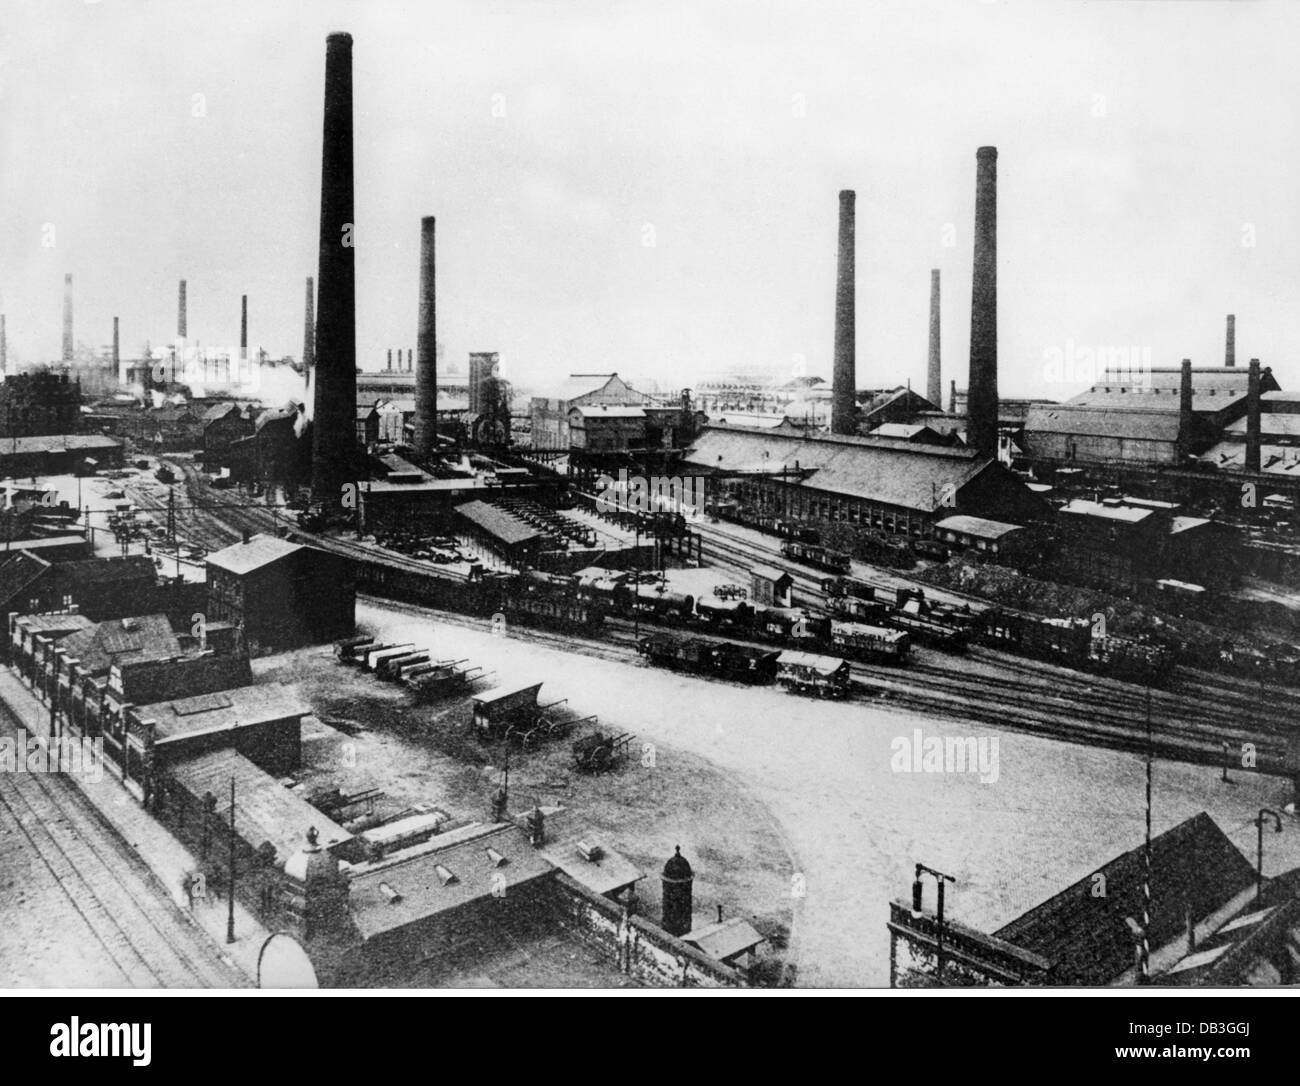 industry,metal,Gewerkschaft Deutscher Kaiser(GDK),exterior view,blast furnace group with coking plant,Thomaswerk,Hamborn,late 19th century,19th century,geography / travel,Germany,Nordrhein Westphalia,Nordrhein- Westfalen North Rhine-Westphalia,North-Rhine,Rhine,Westphalia,Nordrhein-Westfalen,Nordrhein-Westphalen,Duisburg,industrialization,industrialisation,metal industry,heavy industry,heavy industries,metallurgy,smeltery,smelting plant,smelteries,smelting plants,ironworks,factory,factories,factory site,chimney,chimneys,railw,Additional-Rights-Clearences-Not Available Stock Photo